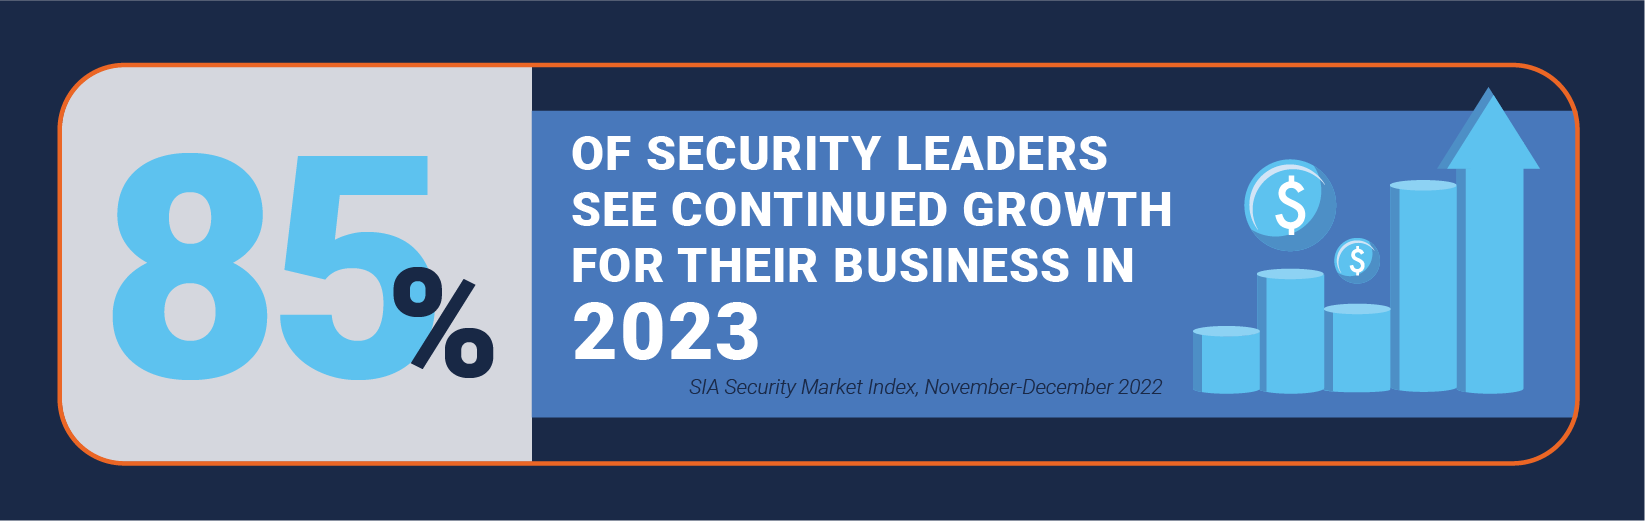 Infographic with statistic that 85% of security leaders see continued growth for their business in 2023.